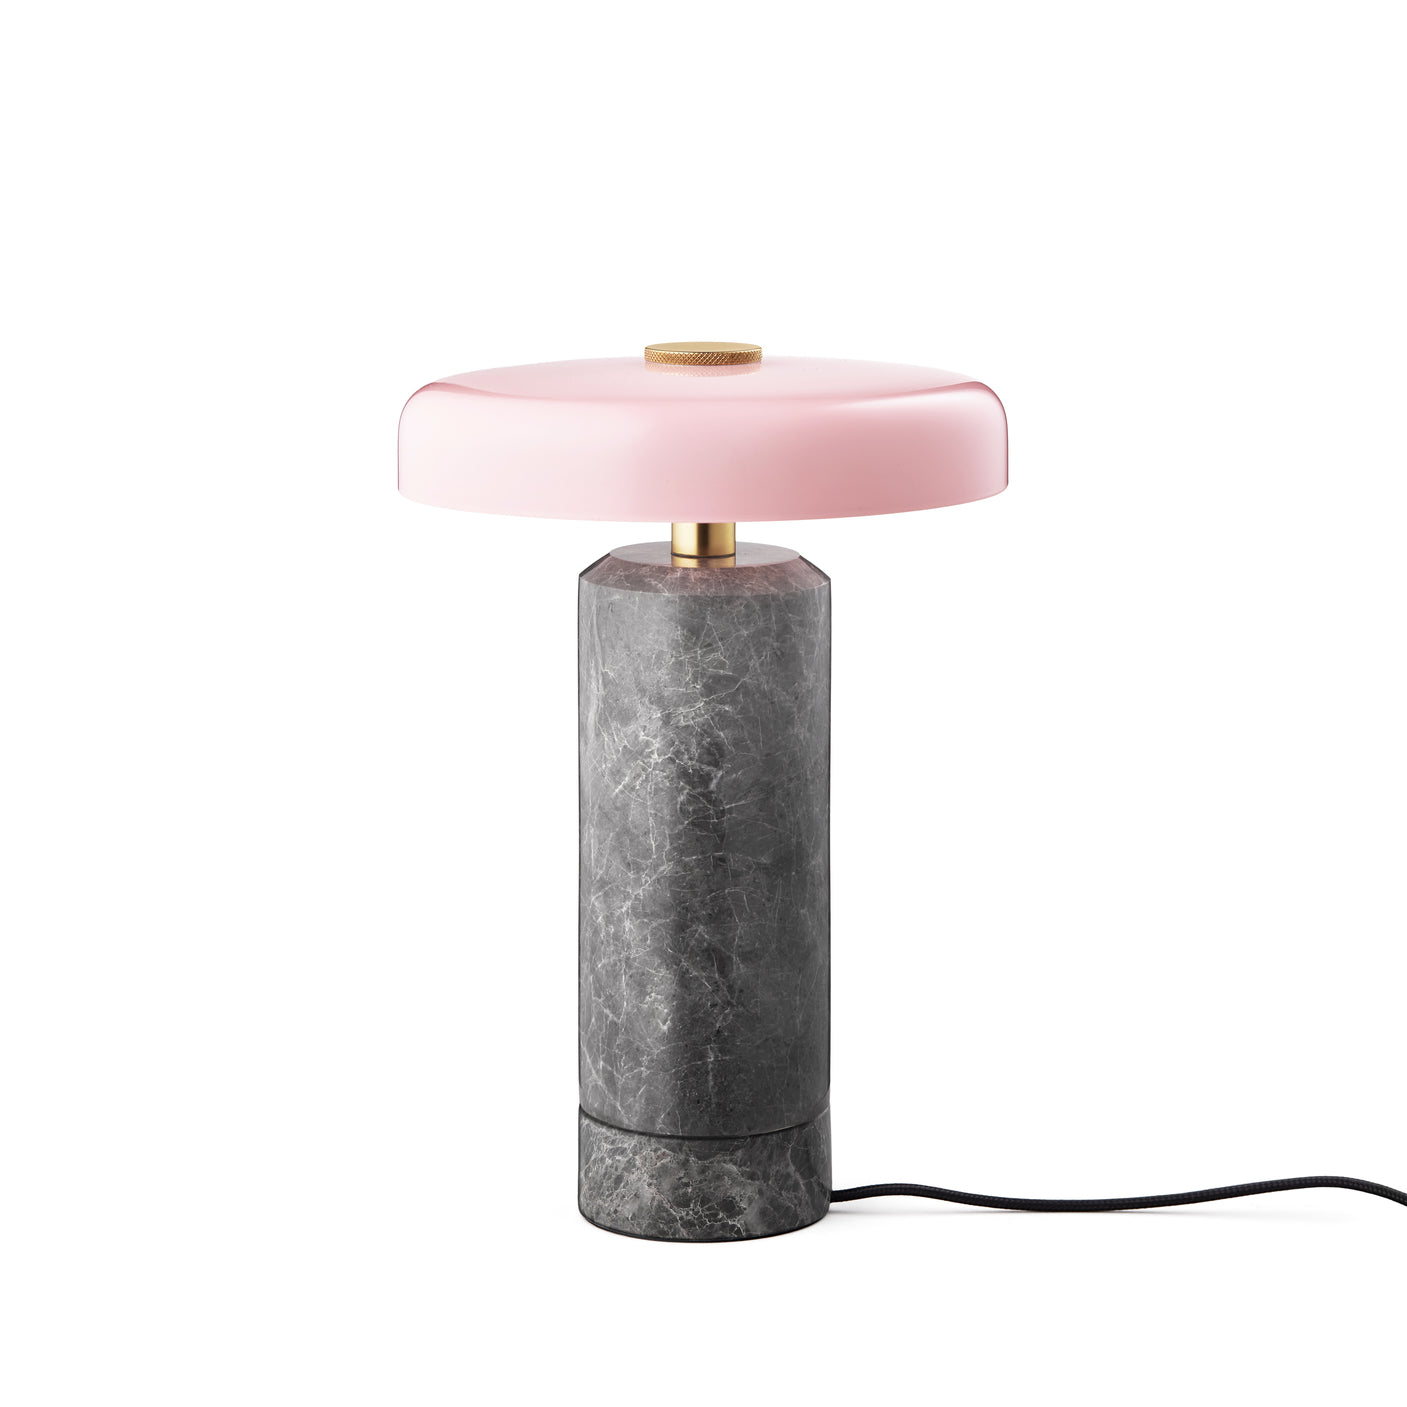 Trip Portable bordlampe, silver/rose glossy • Design by Us